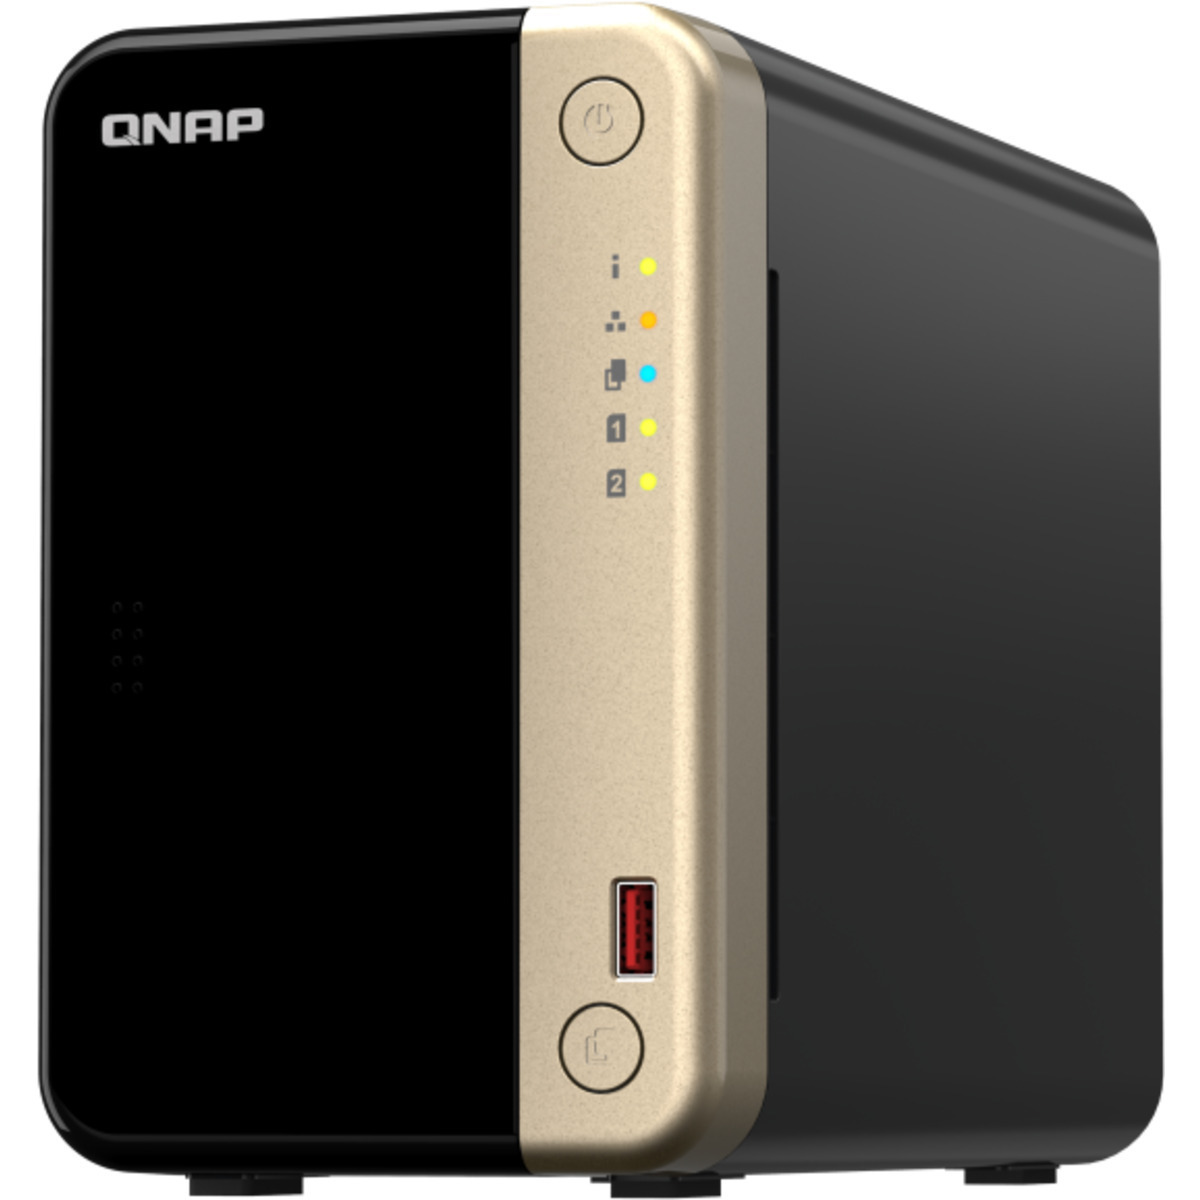 buy QNAP TS-264 8tb Desktop NAS - Network Attached Storage Device 2x4000gb Samsung 870 EVO MZ-77E4T0BAM 2.5 560/530MB/s SATA 6Gb/s SSD CONSUMER Class Drives Installed - Burn-In Tested - ON SALE - nas headquarters buy network attached storage server device das new raid-5 free shipping simply usa TS-264